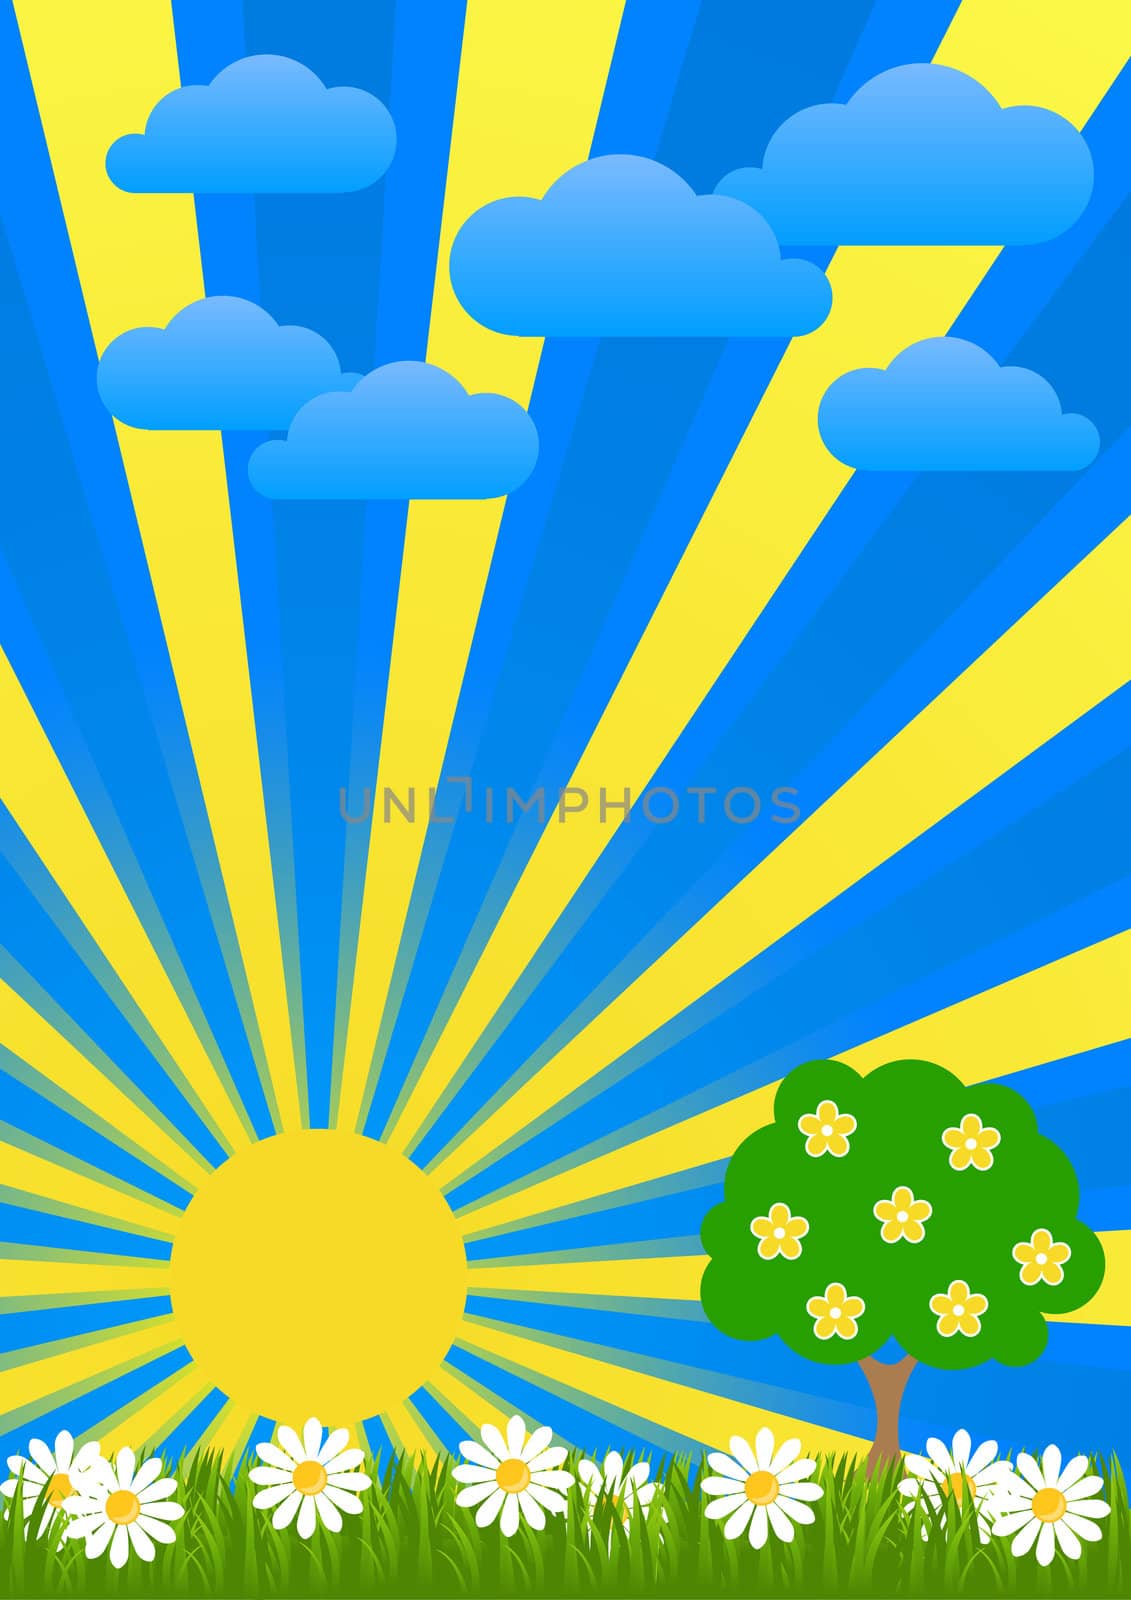 Dawn Flower Fields flooded with sunlight vector illustration